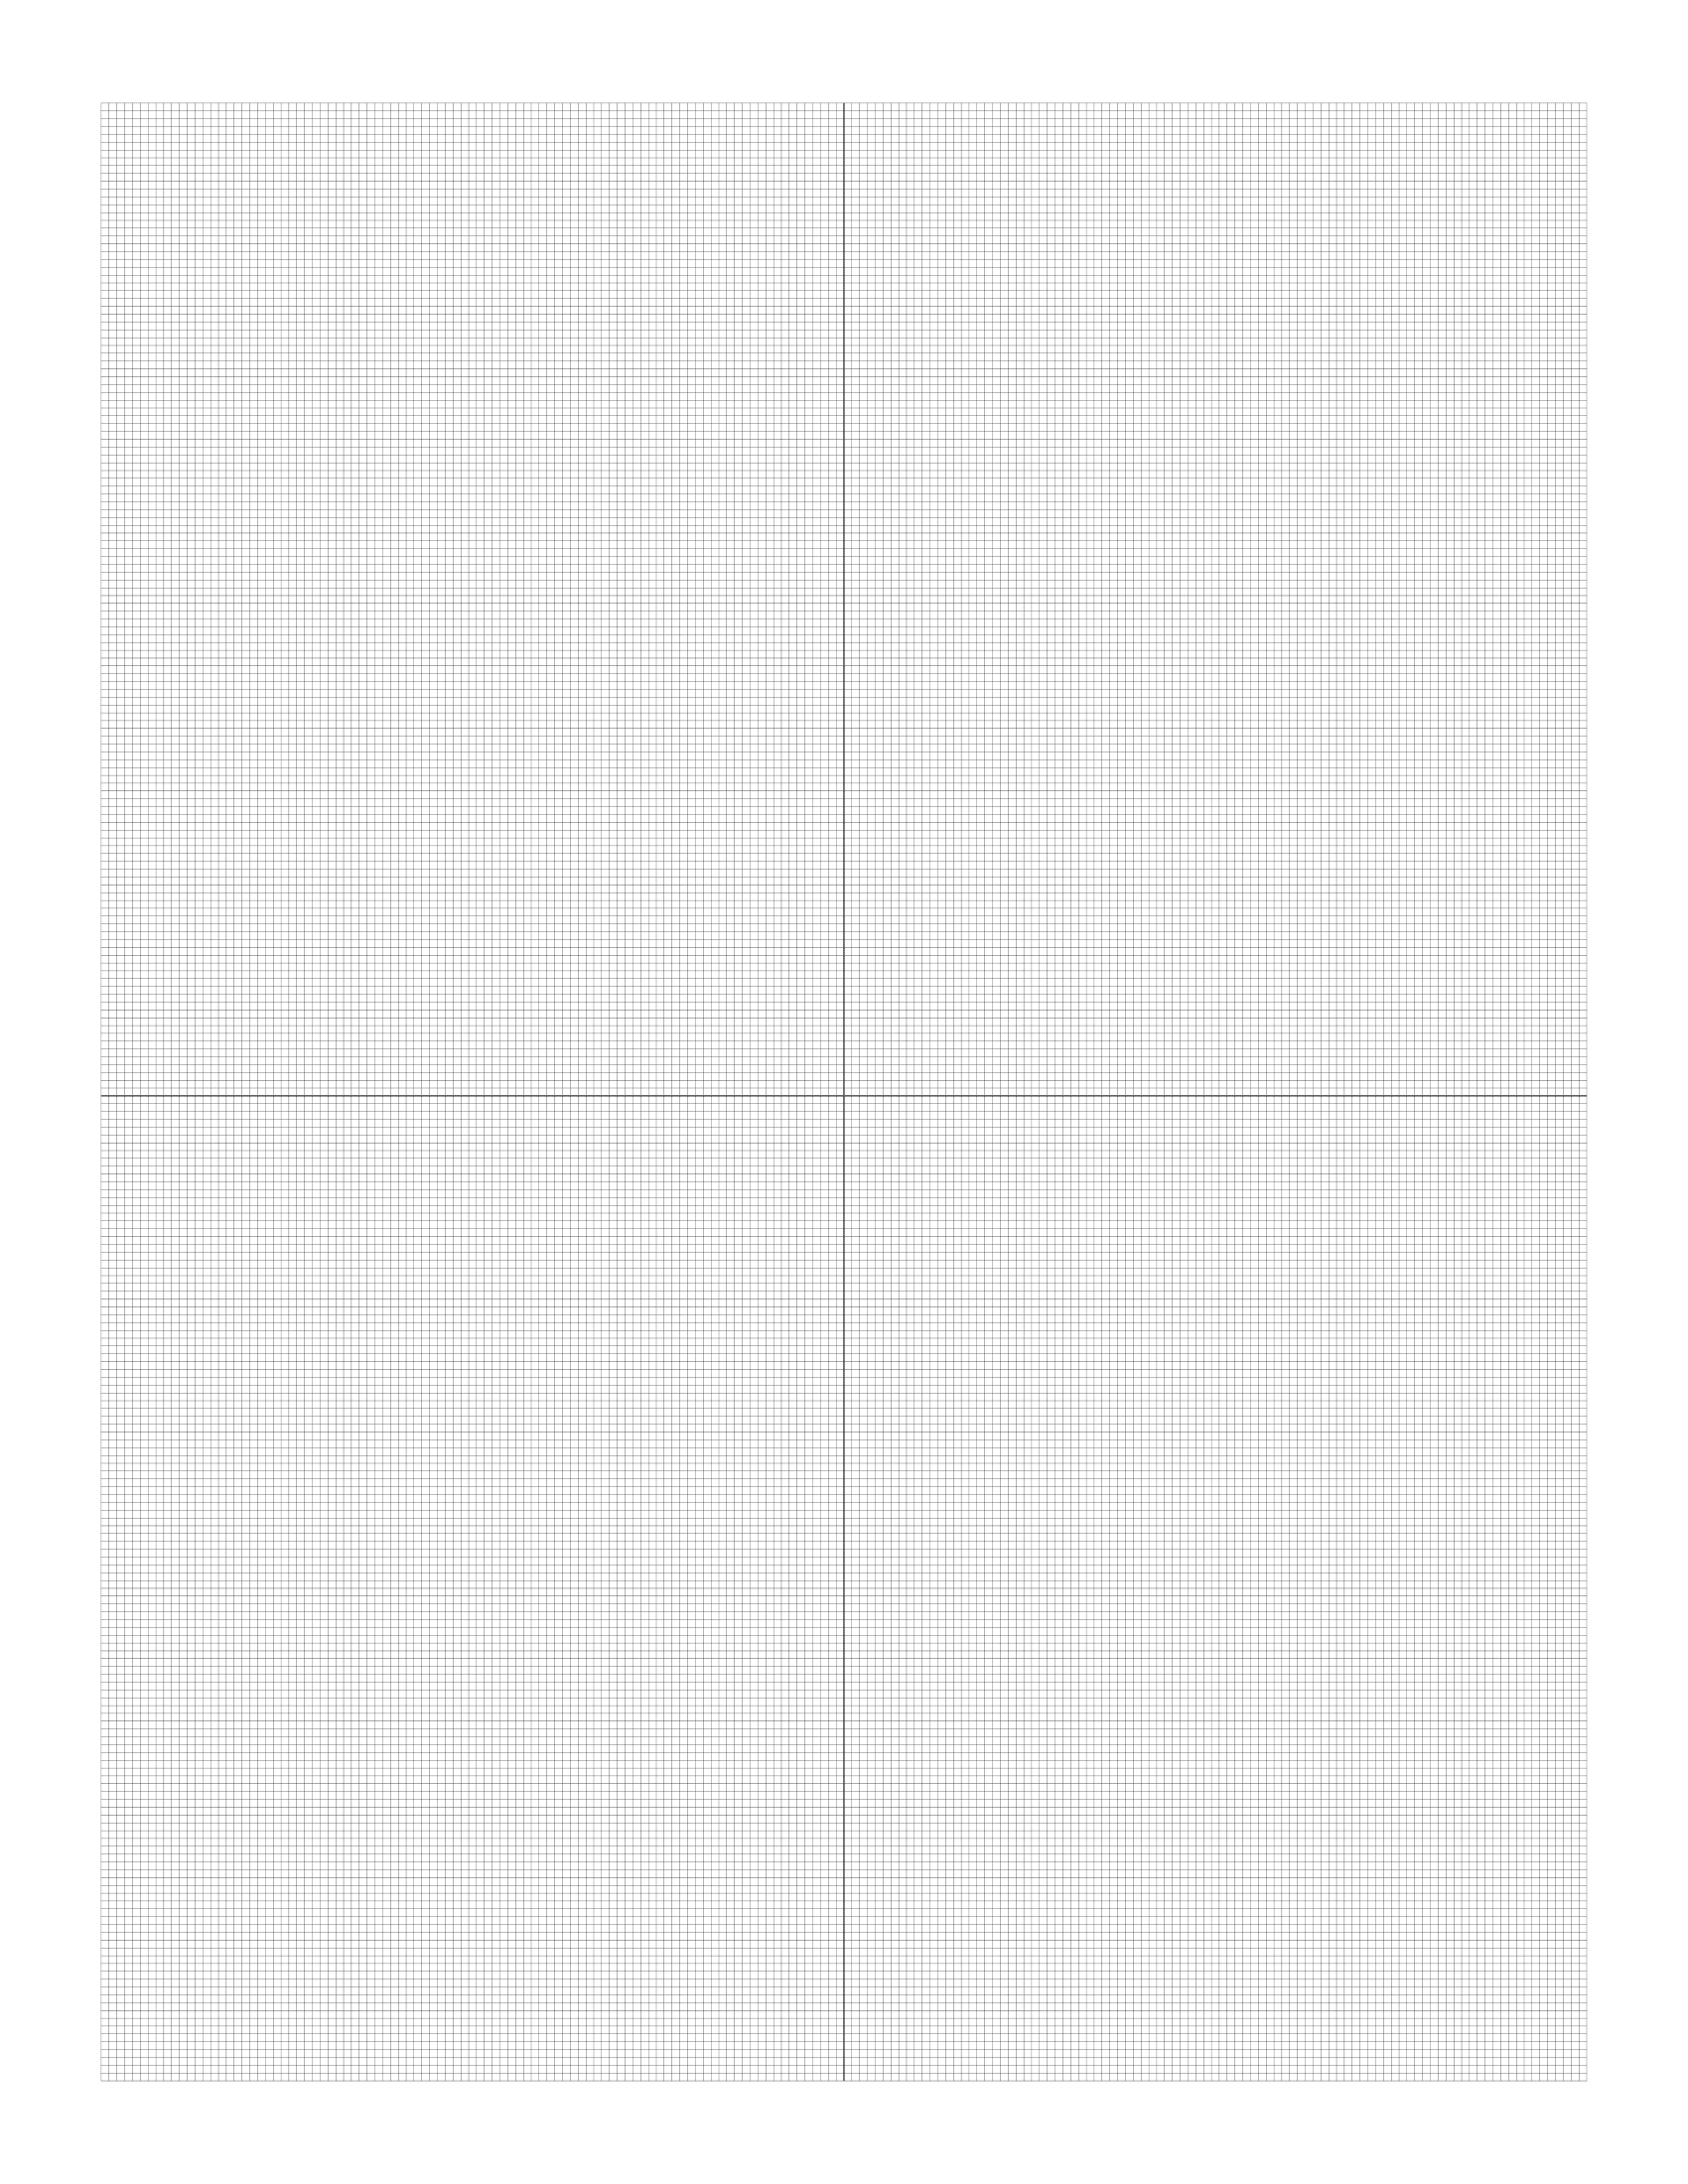 free-graph-paper-to-print-outlet-store-save-48-jlcatj-gob-mx